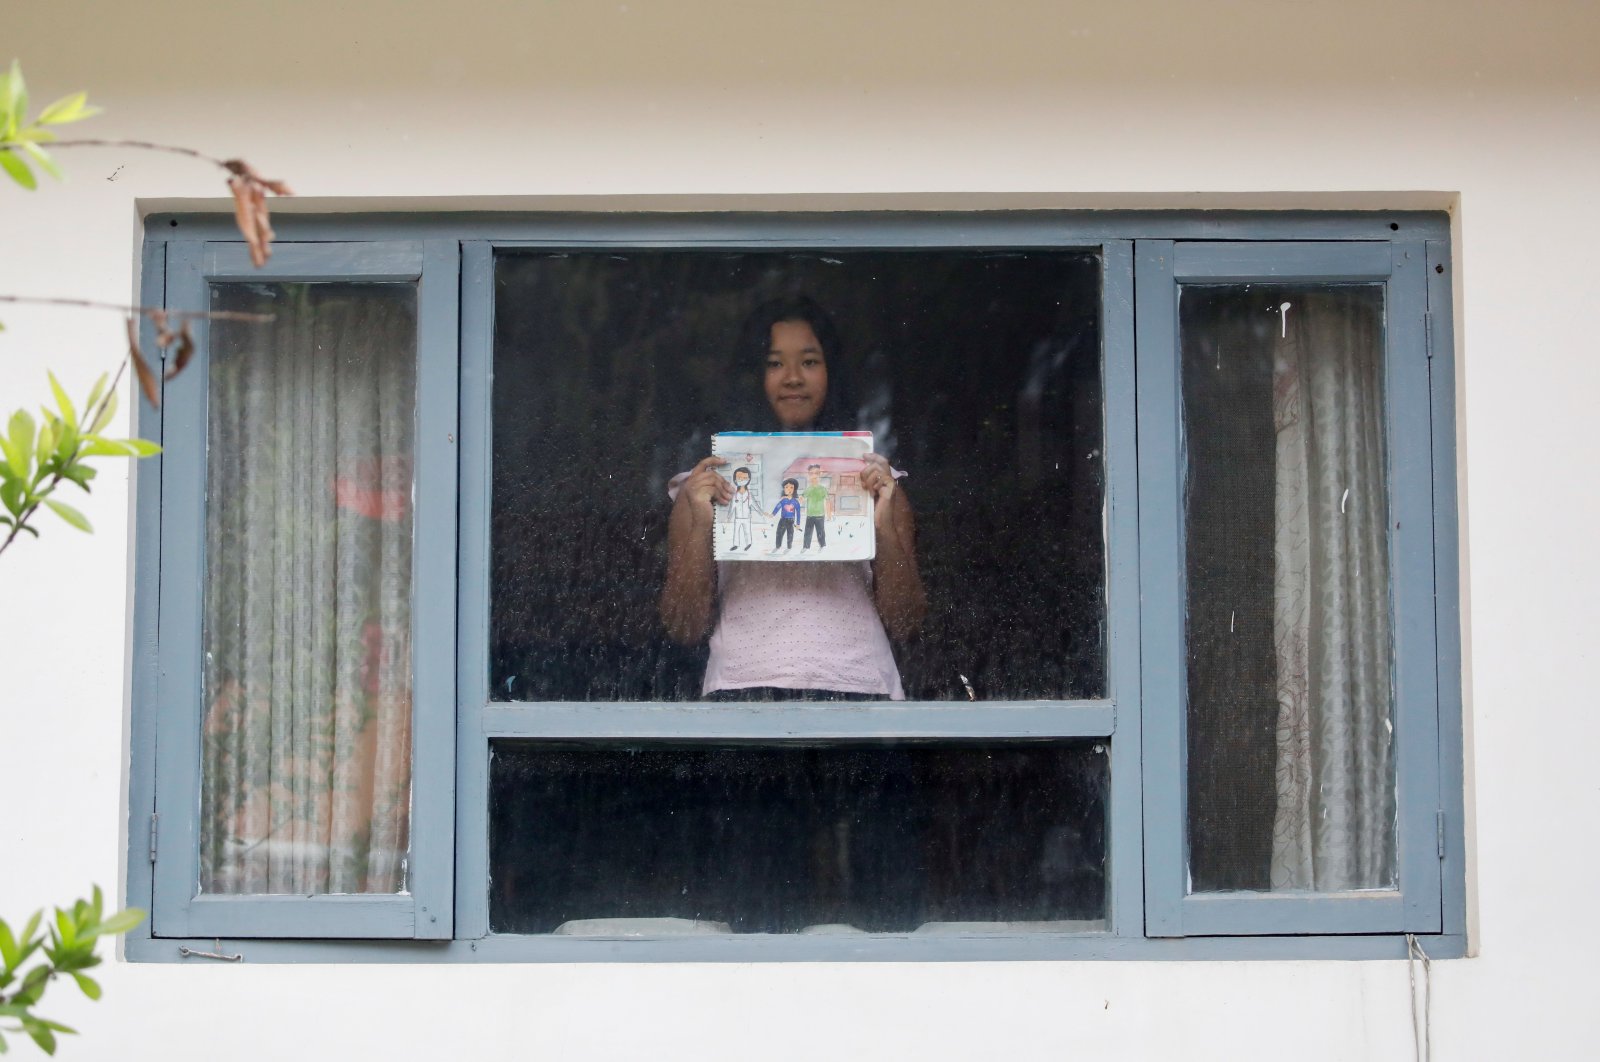 A girl poses for a photograph while holding a picture that she drew during the coronavirus outbreak, Kathmandu, Nepal, April 16, 2020. (REUTERS Photo)